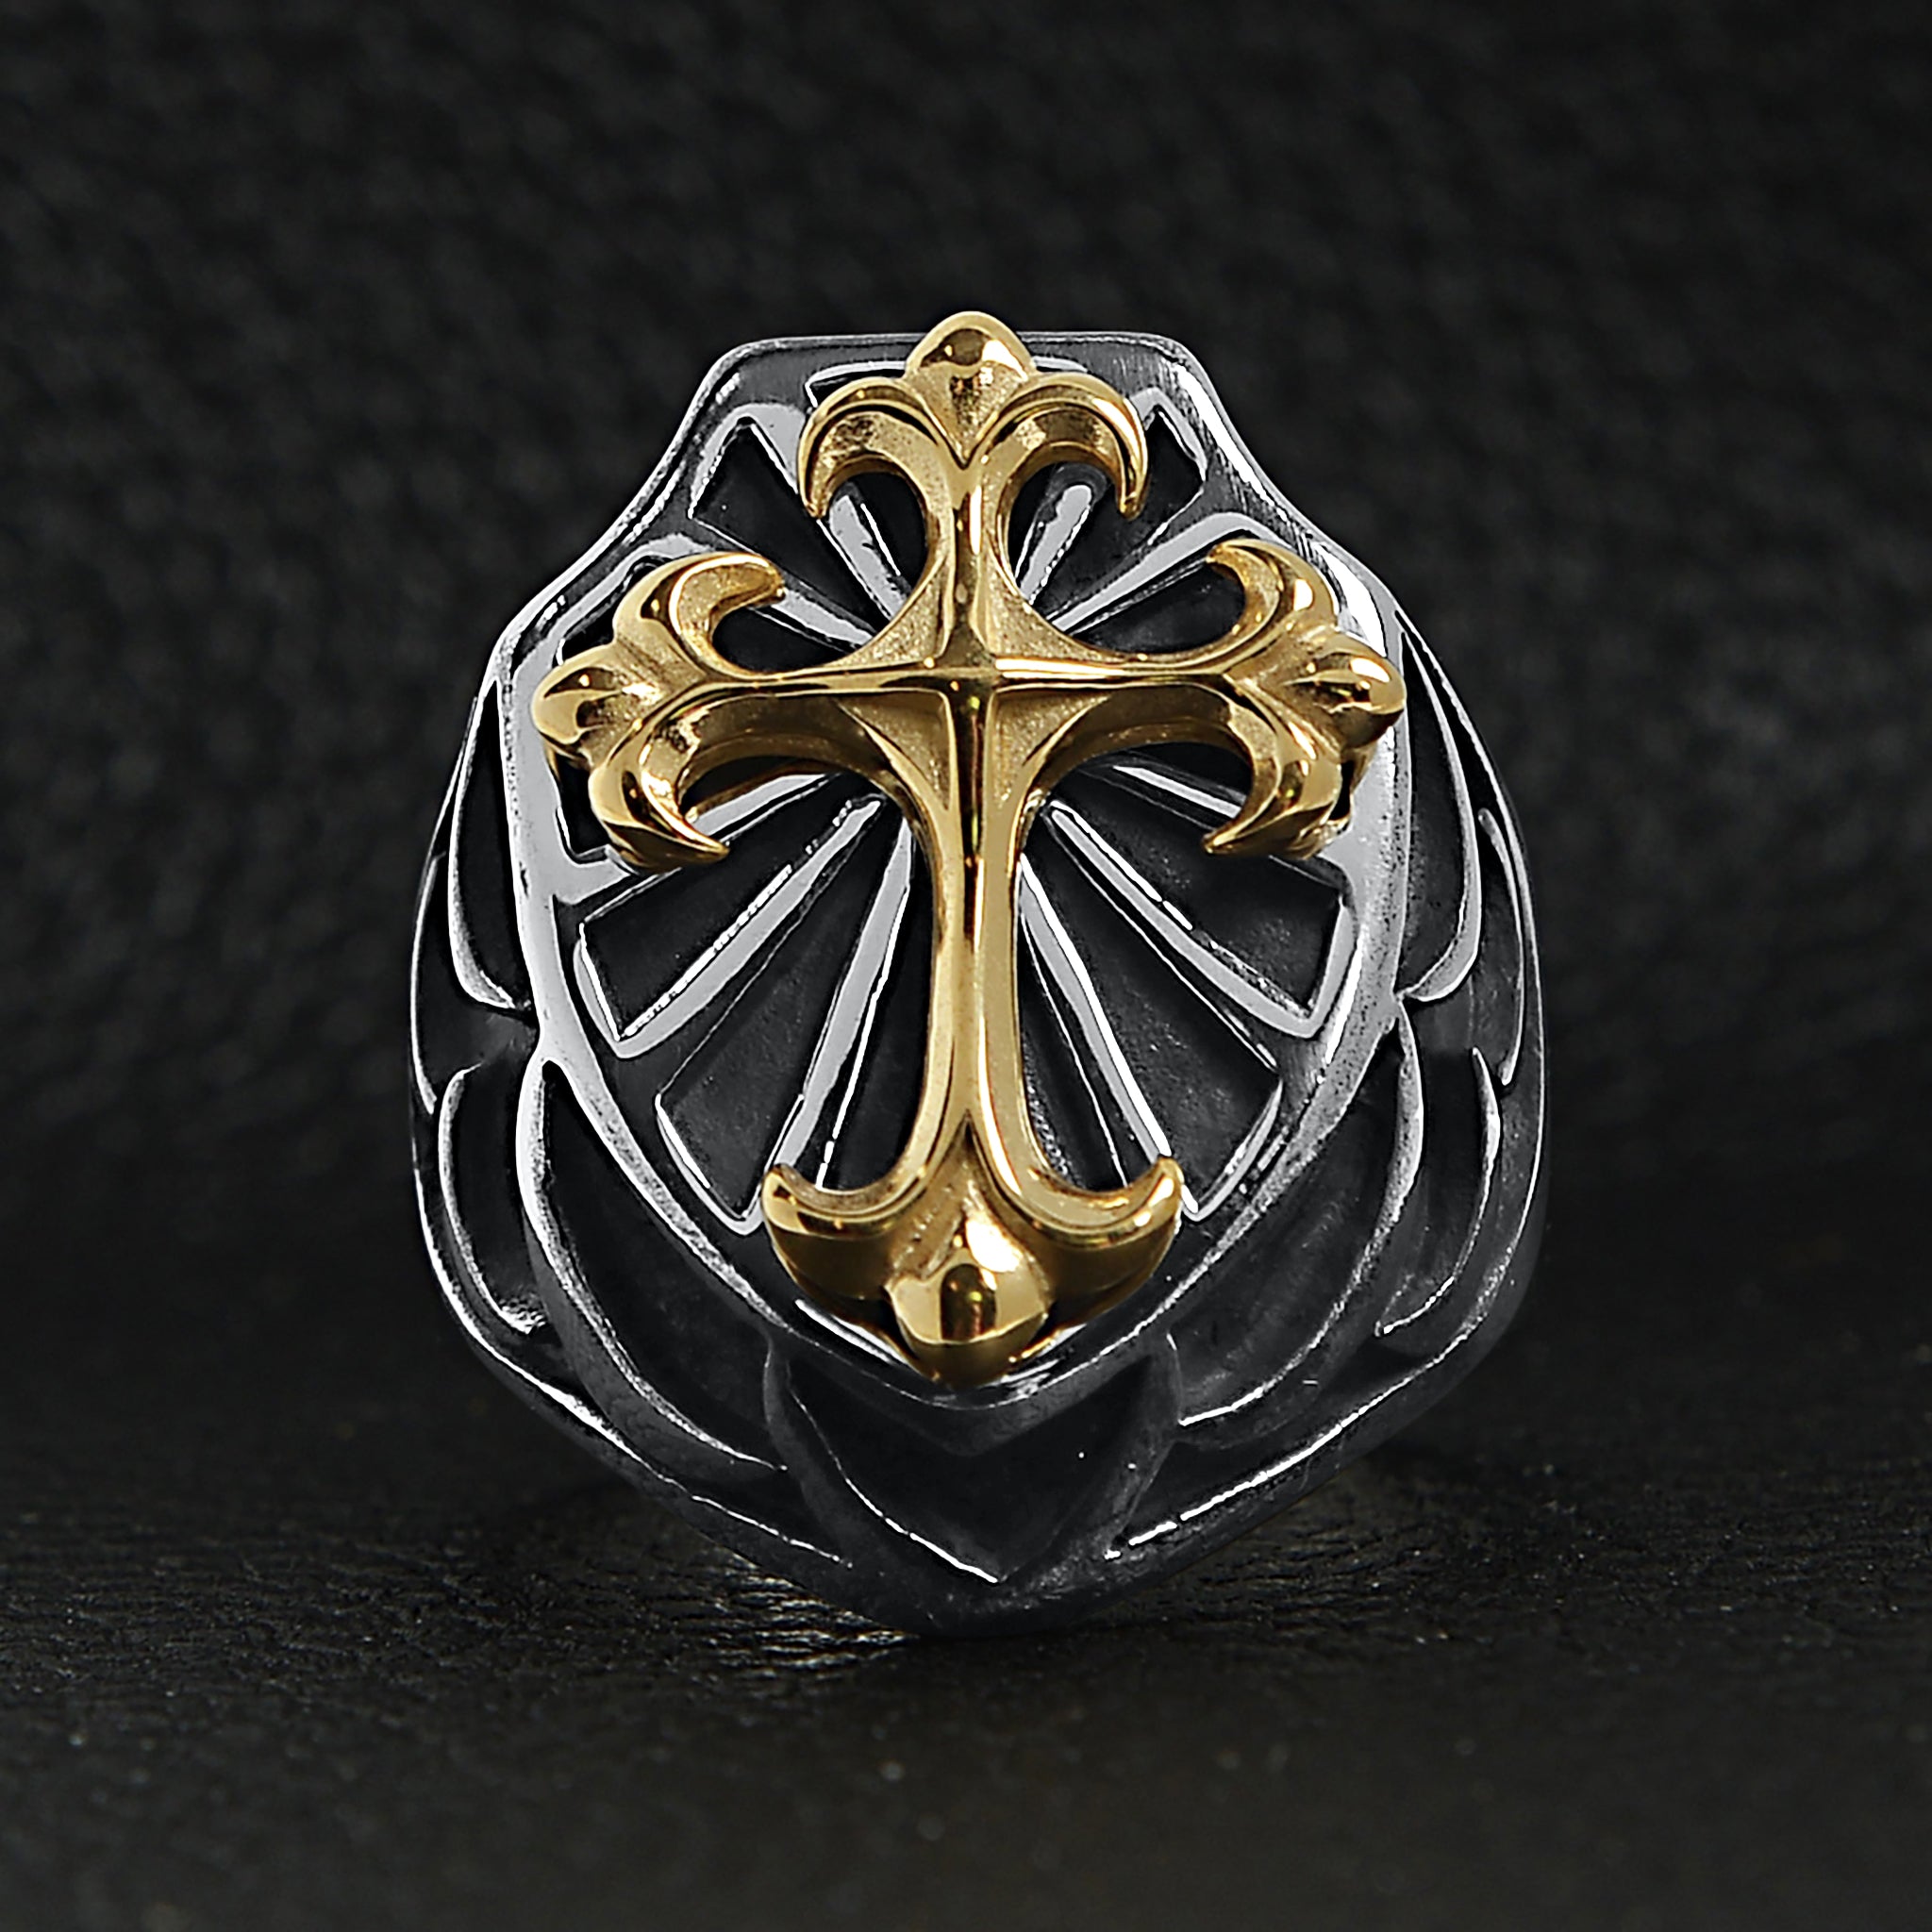 Stainless Steel Gold PVD Cross Shield Signet Ring - Durable and Hypoallergenic - Jewelry & Watches - Bijou Her -  -  - 